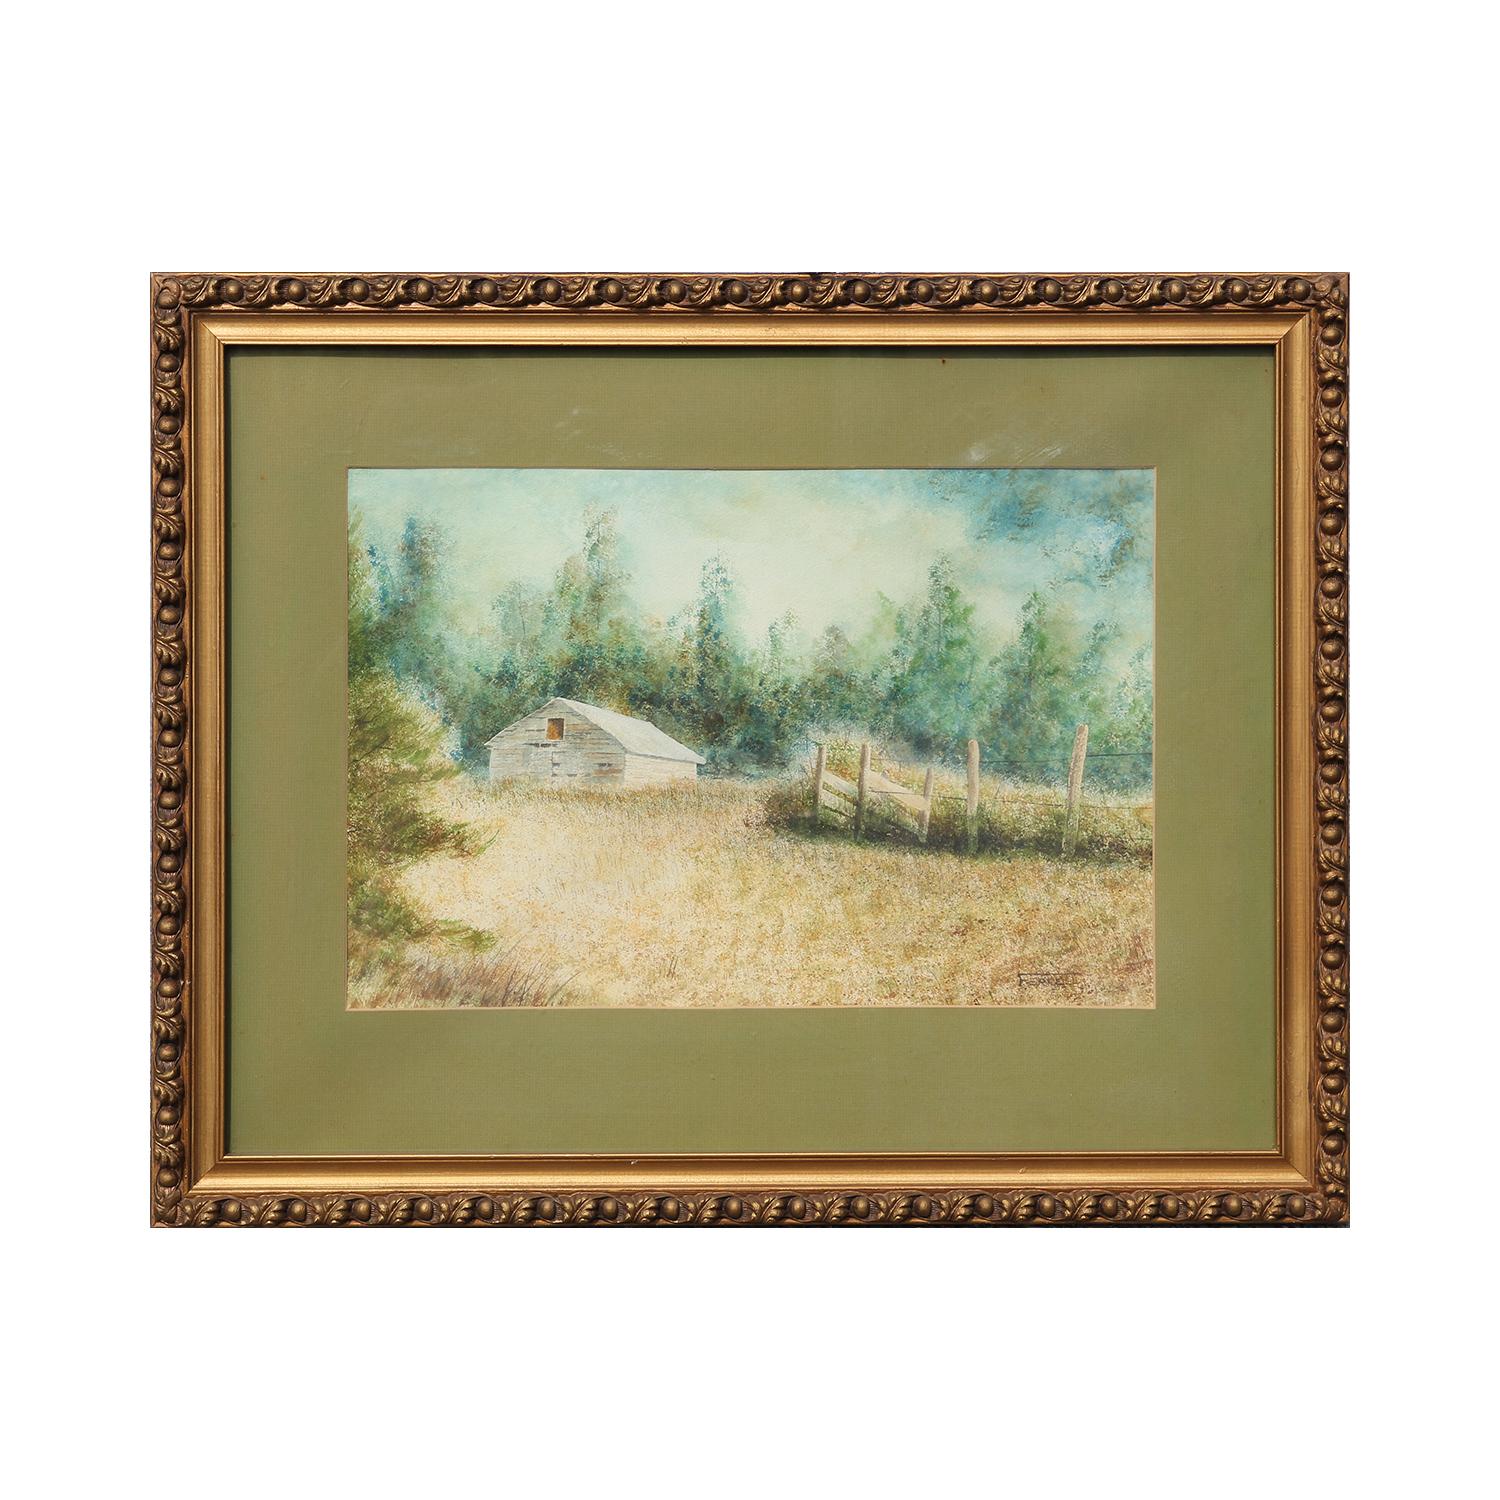 Blue and Green Toned Watercolor and Ink Farm Landscape - Painting by Herman Ferrell